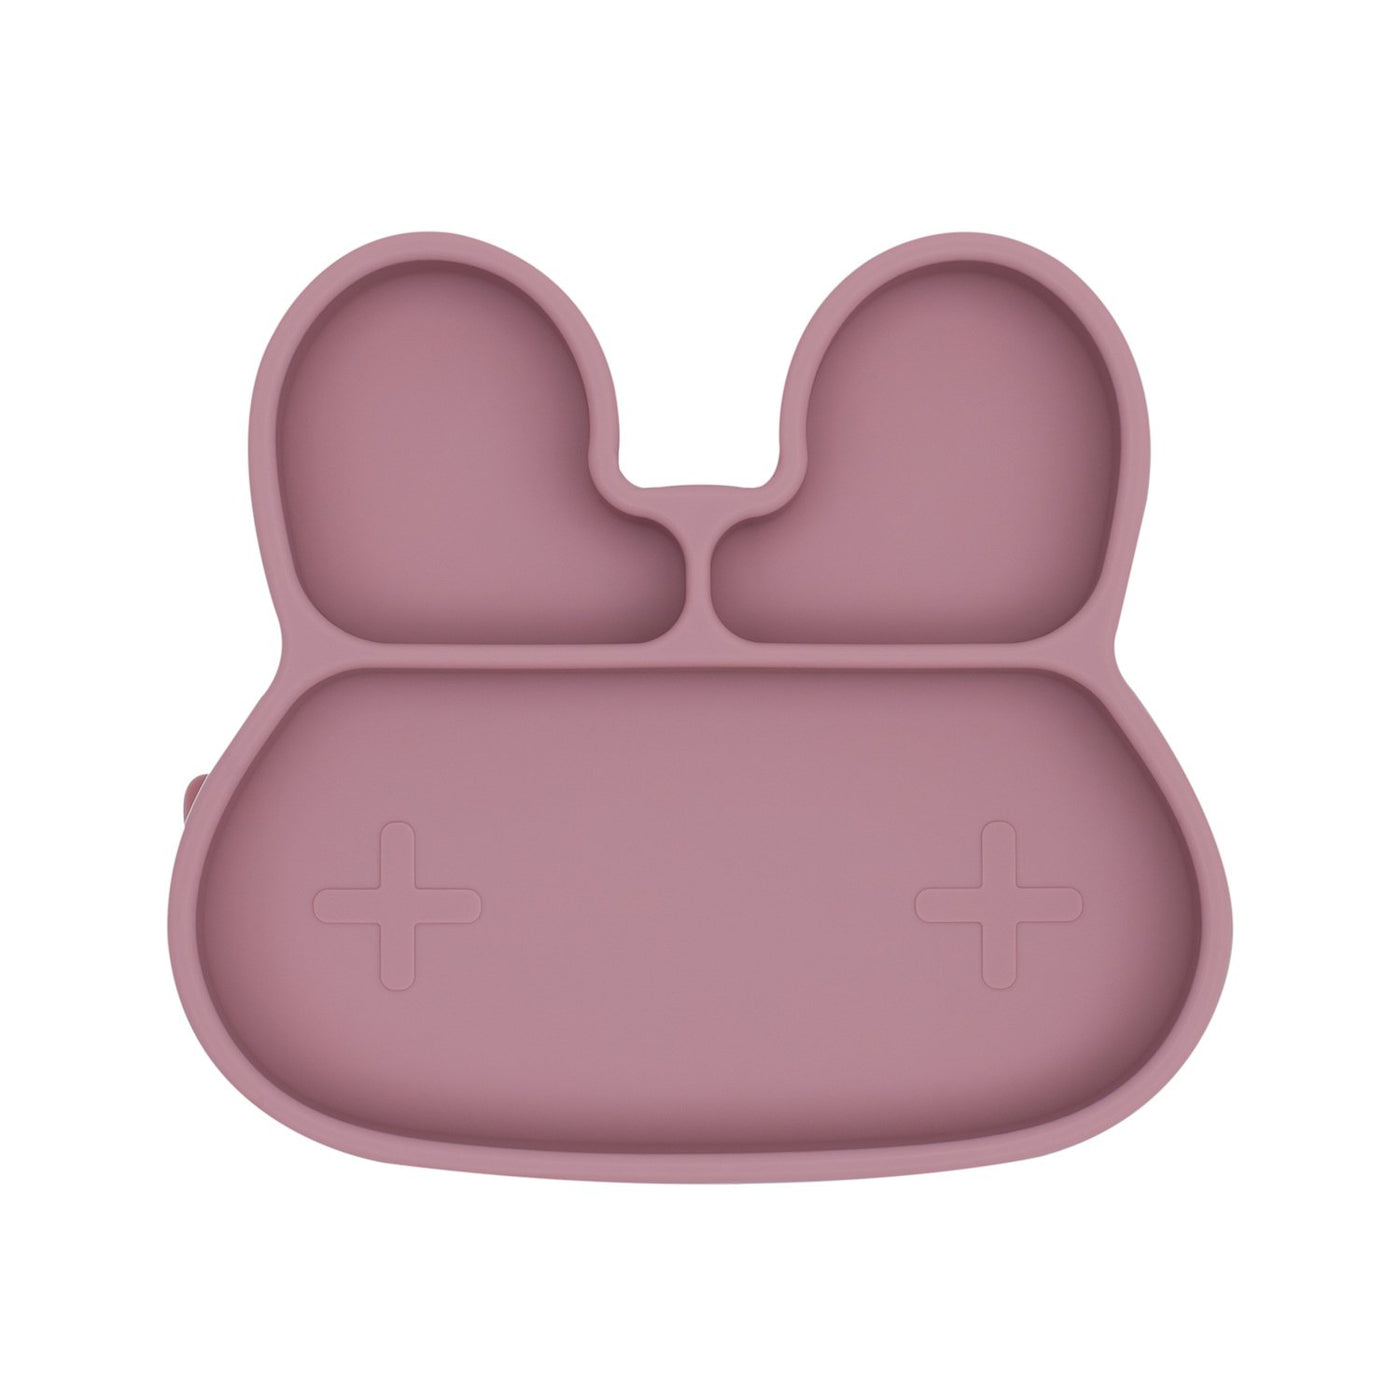 Bunny Stickie™ Plate - Dusty Rose